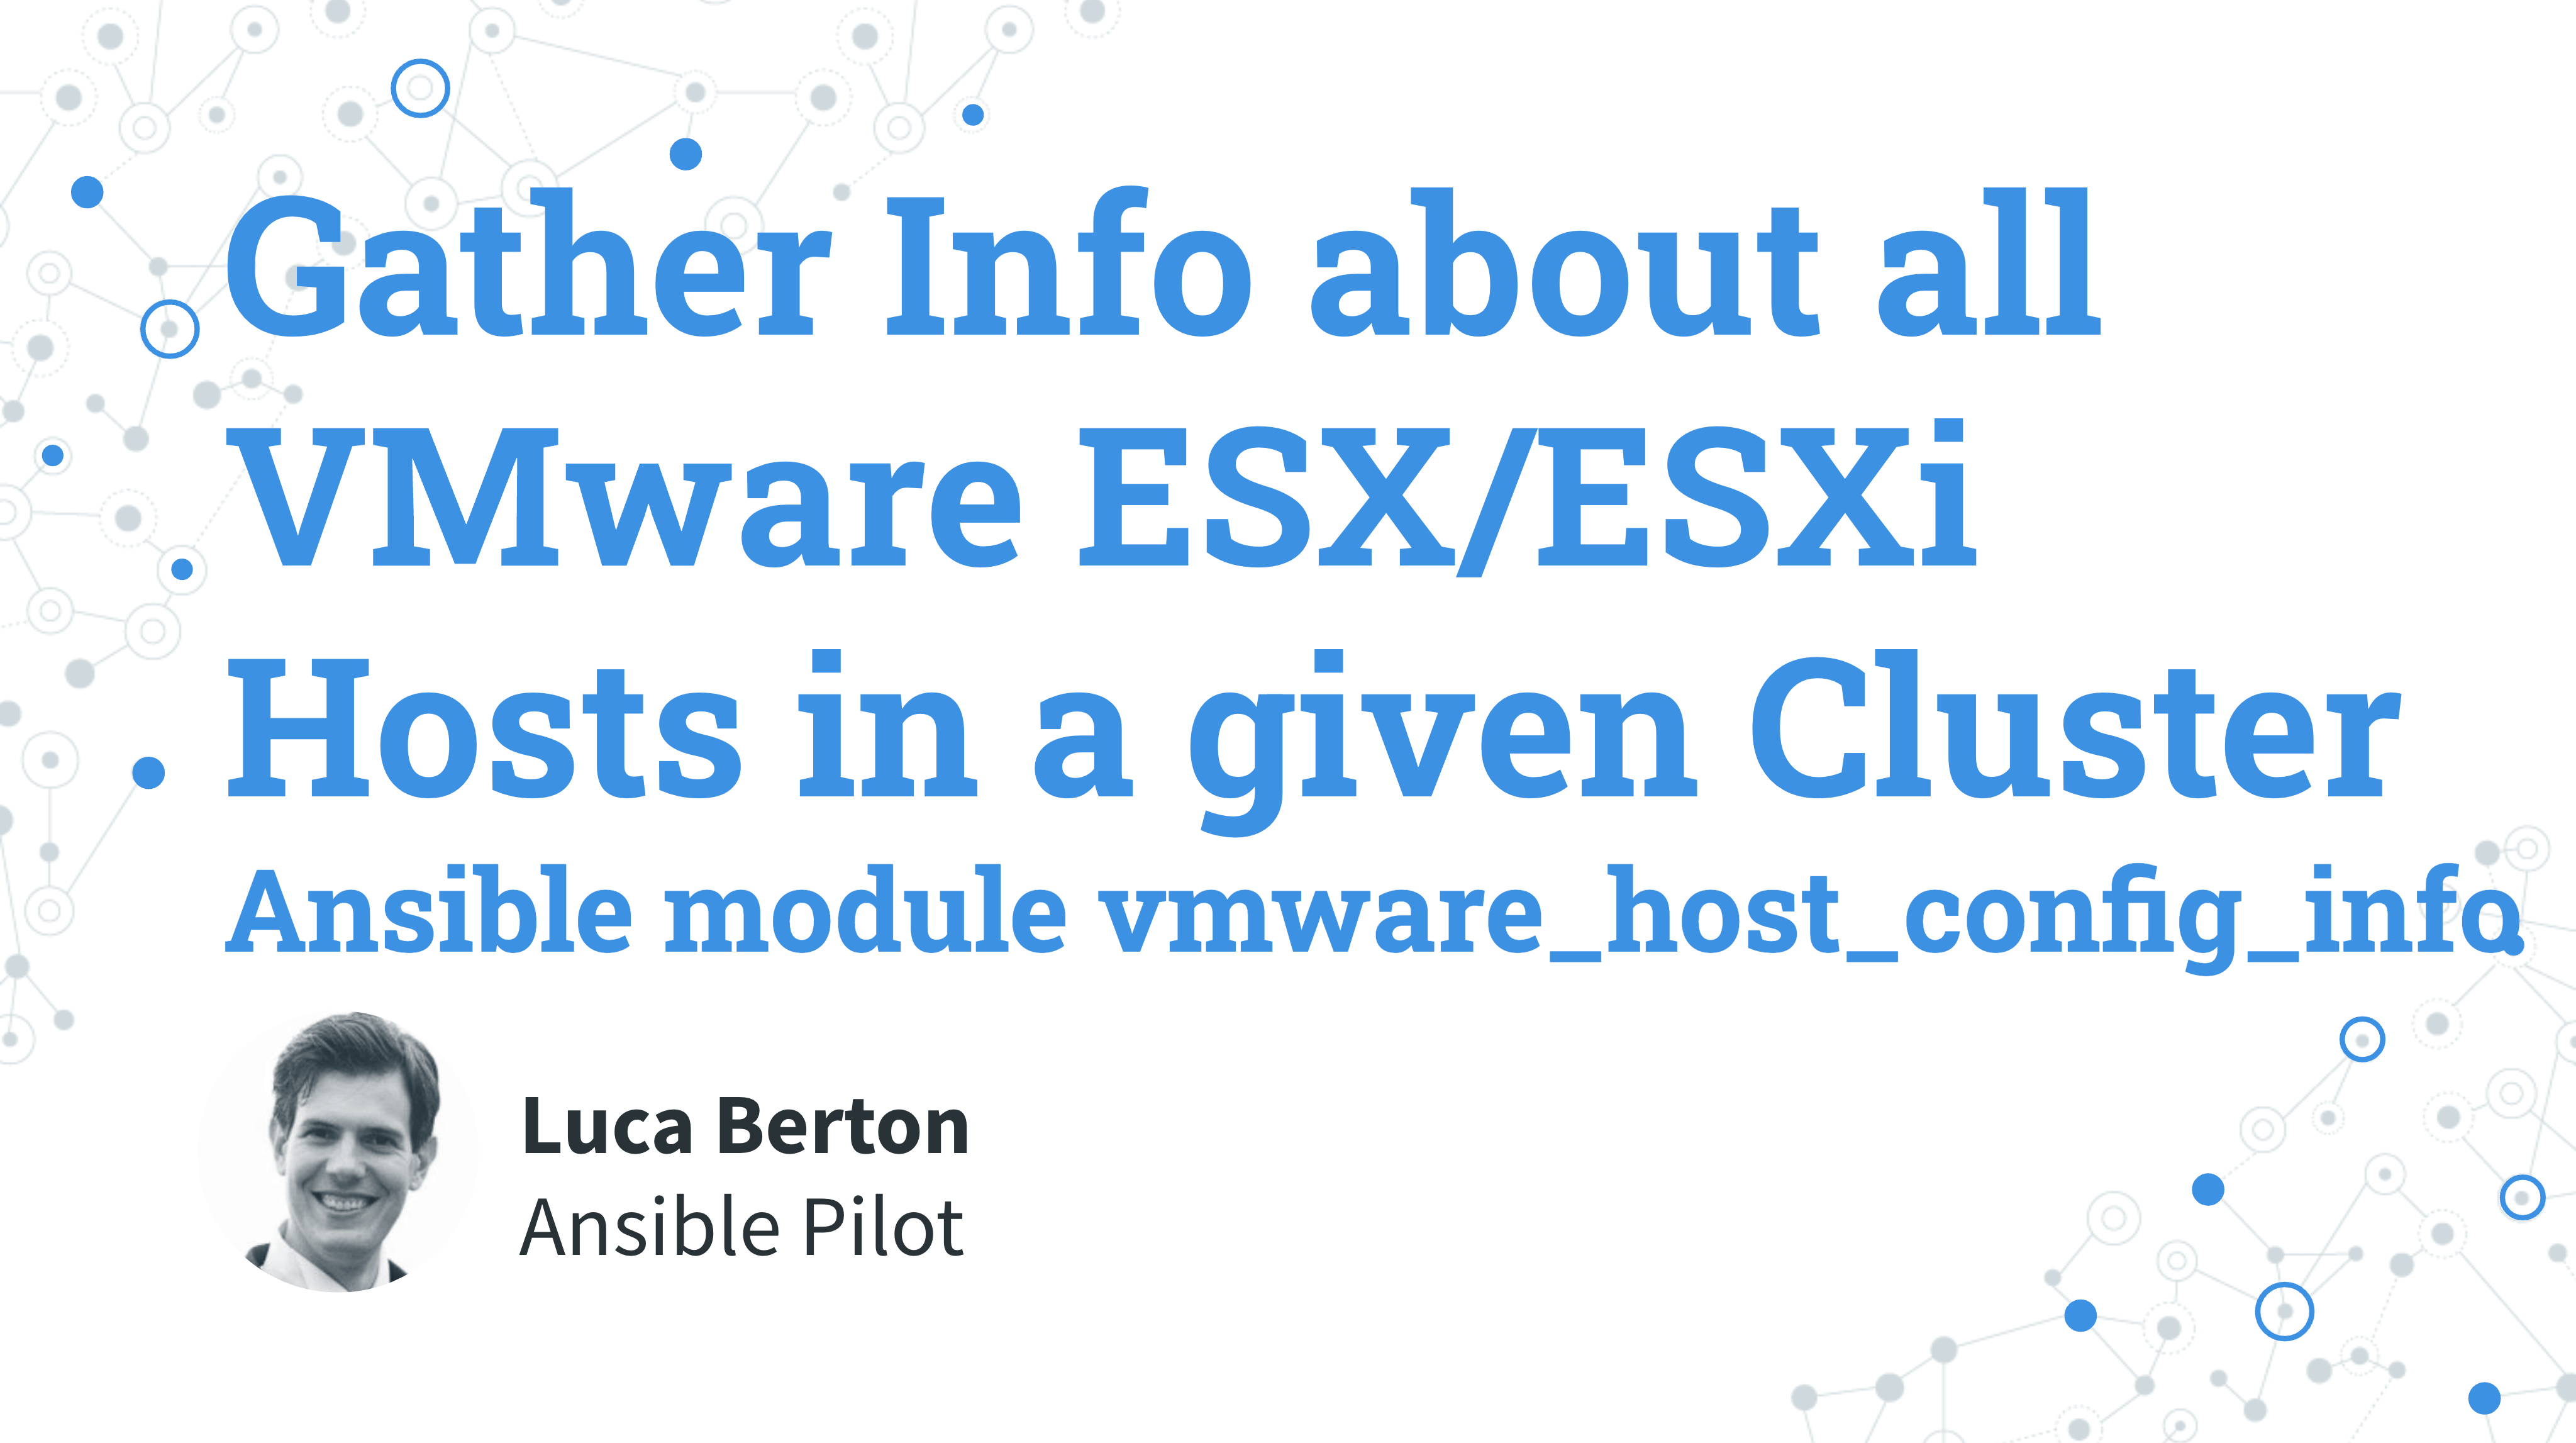 Gather Info about all VMware ESX/ESXi Hosts in a given Cluster - Ansible module vmware_host_config_info